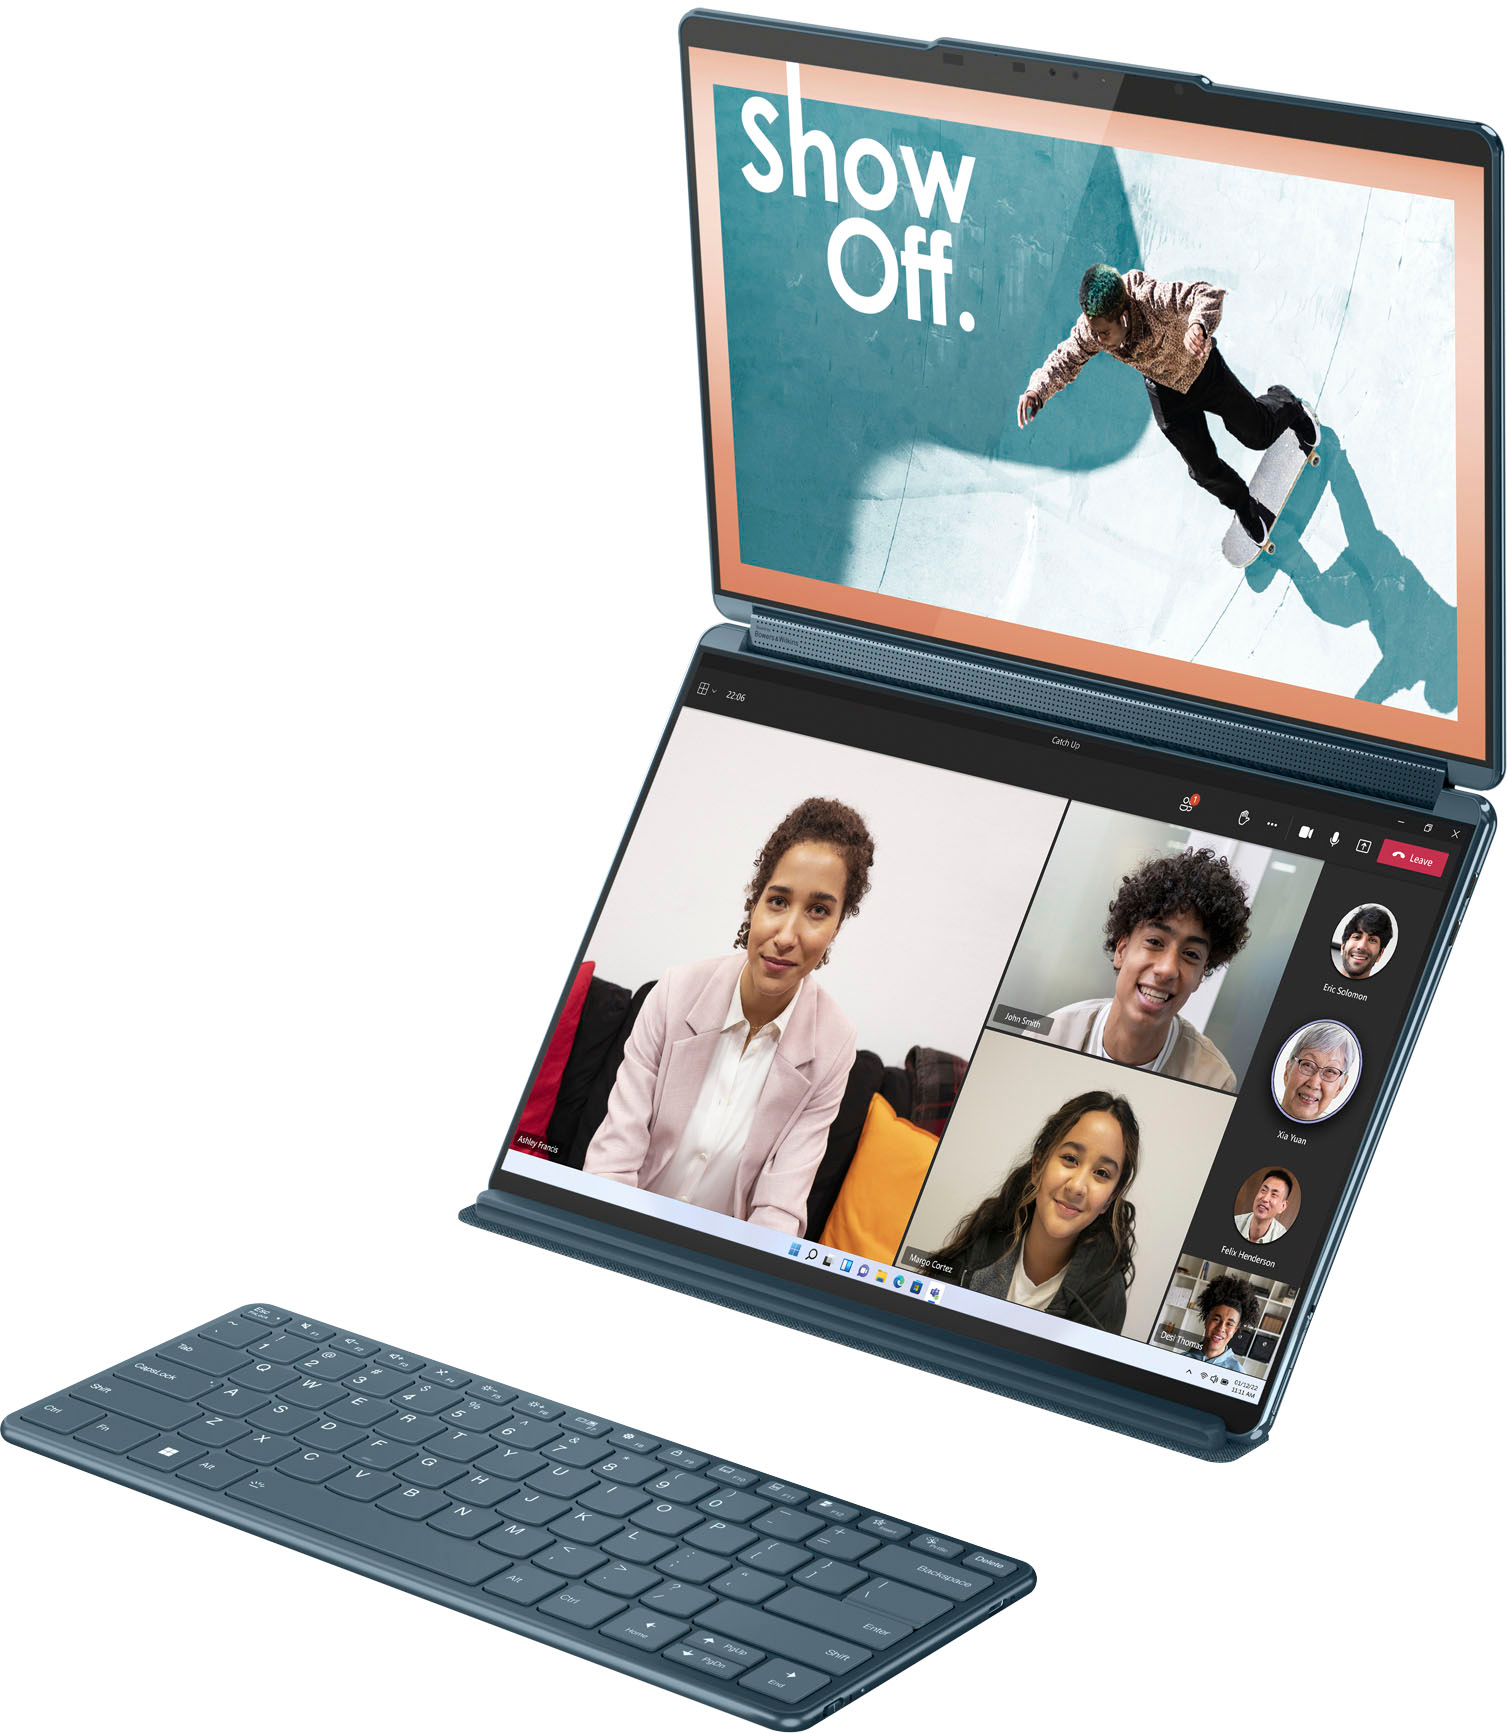 Lenovo Yoga Duet 2021 2-in-1 Notebook, New Xiaoxin Laptops